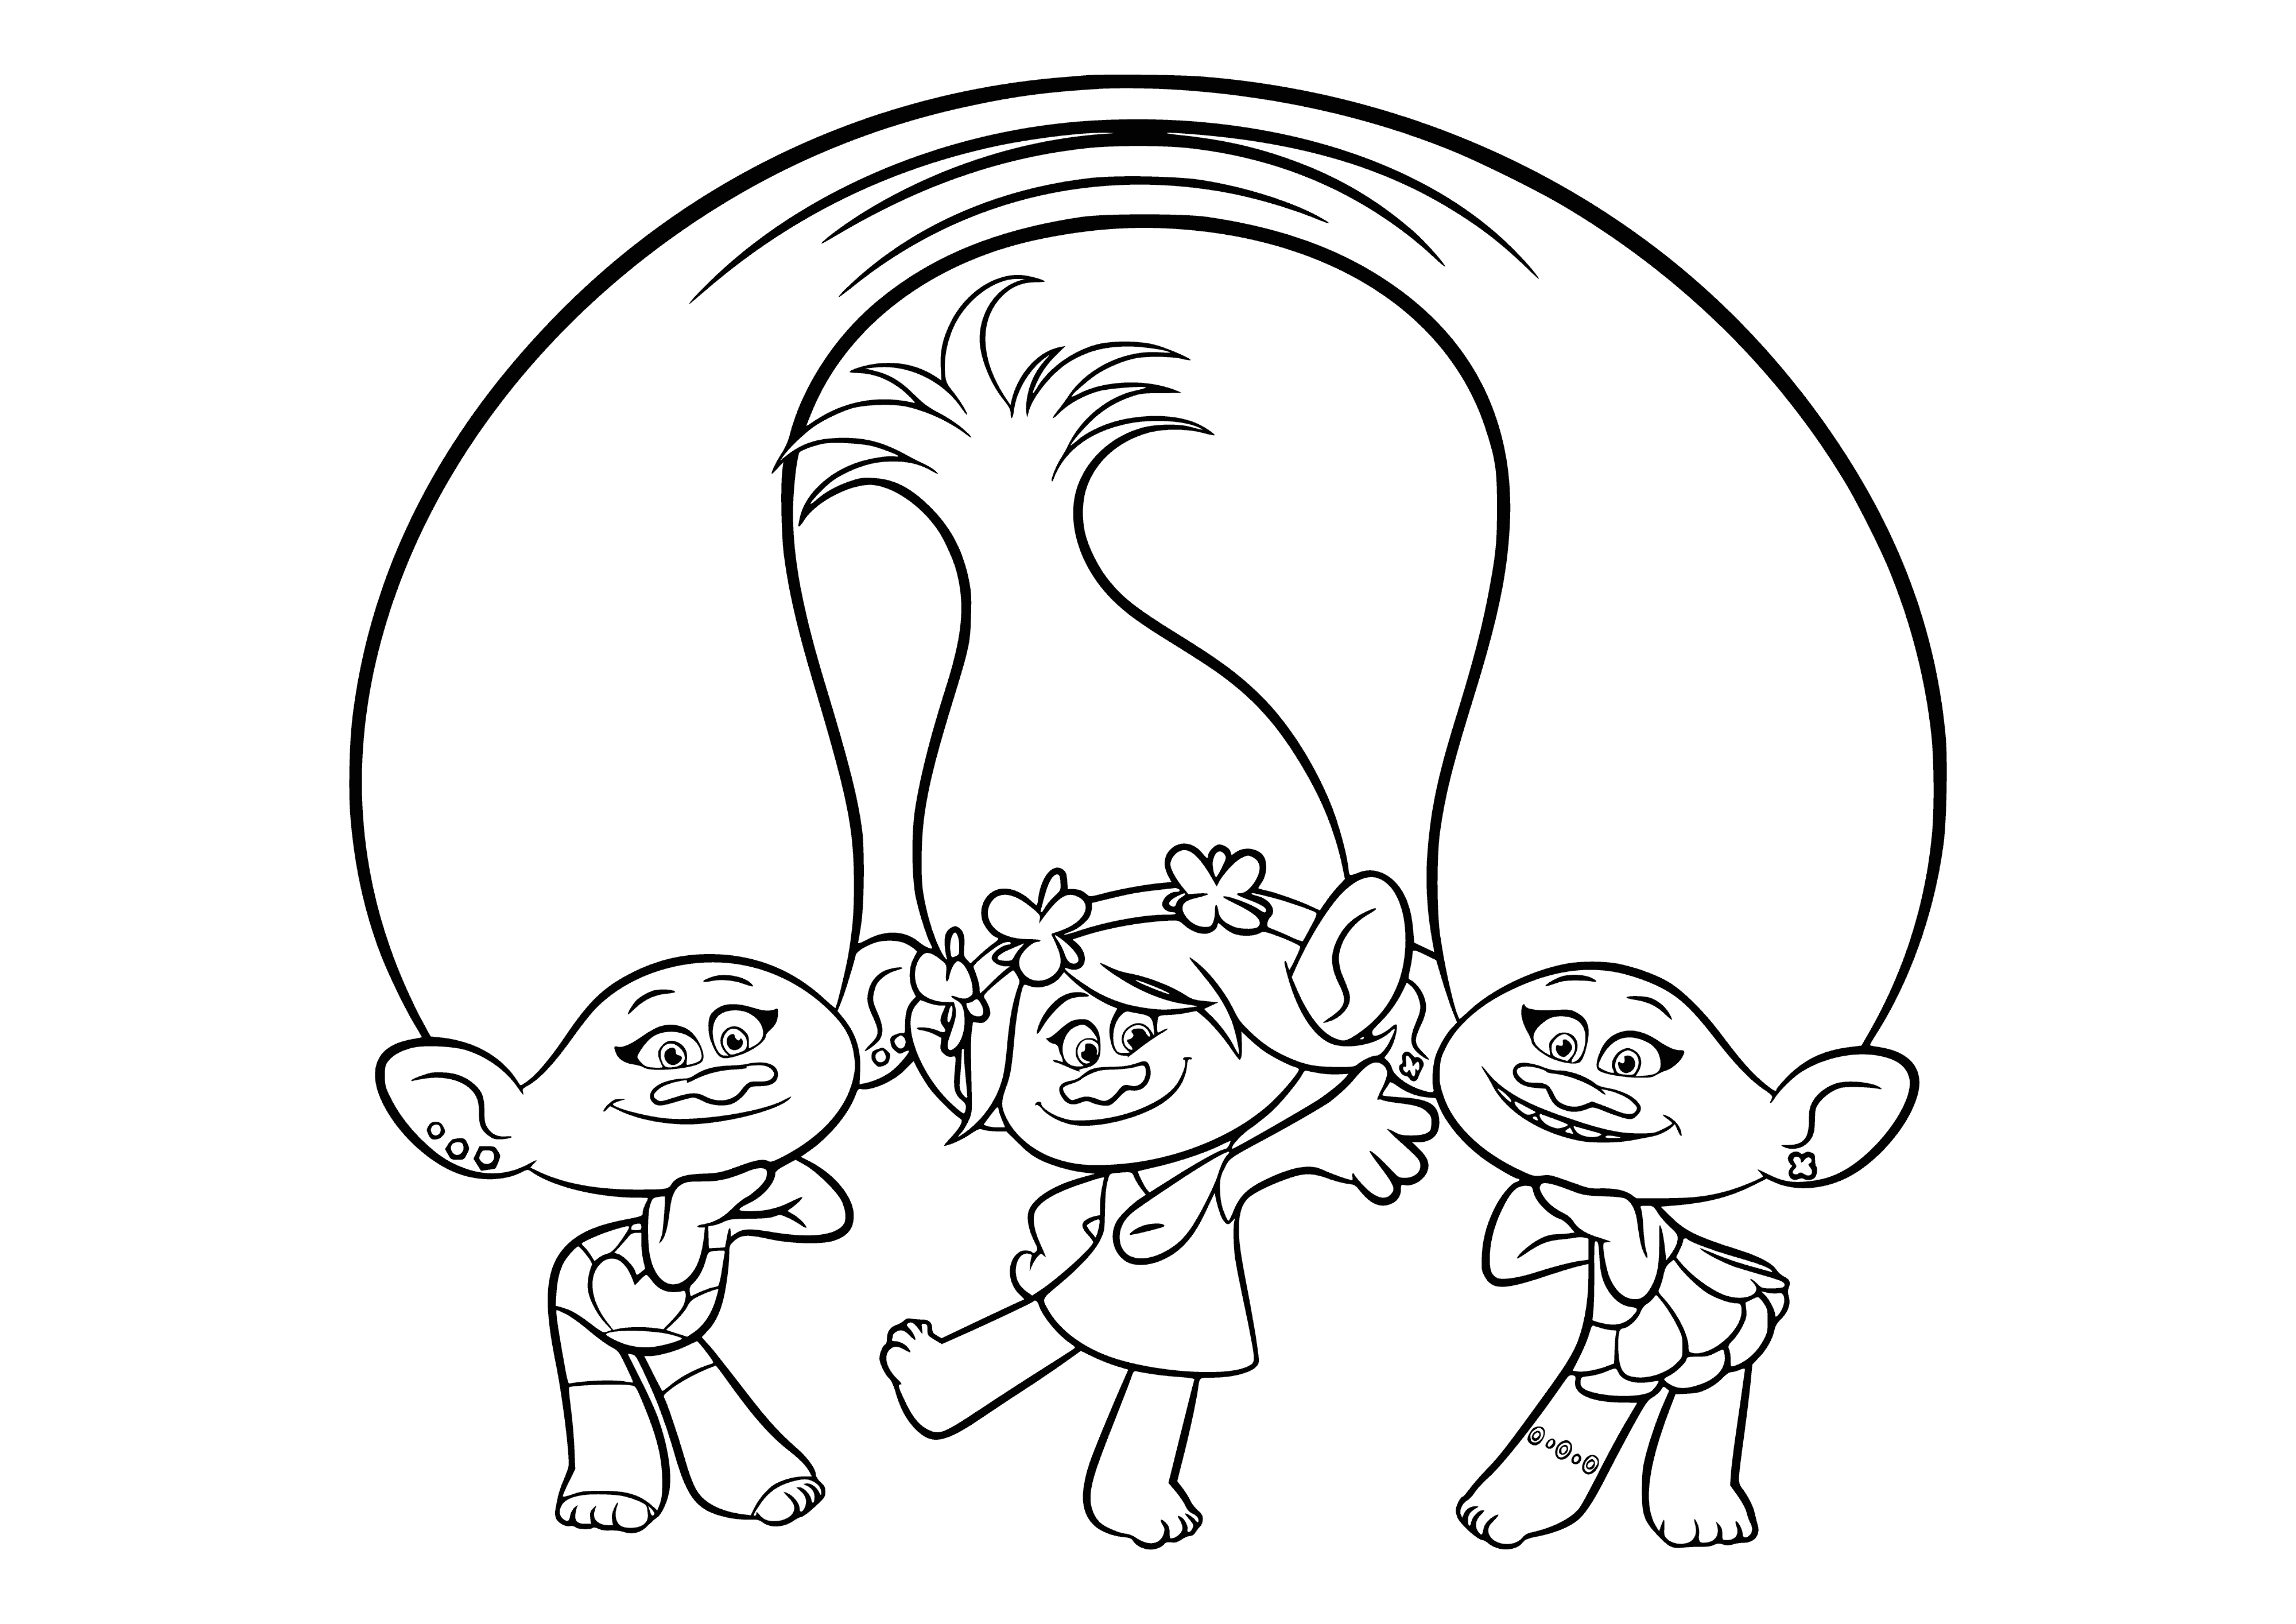 coloring page: Two happy blue trolls with white hair, big noses and necklaces, arms raised in the air. #ColoringPage